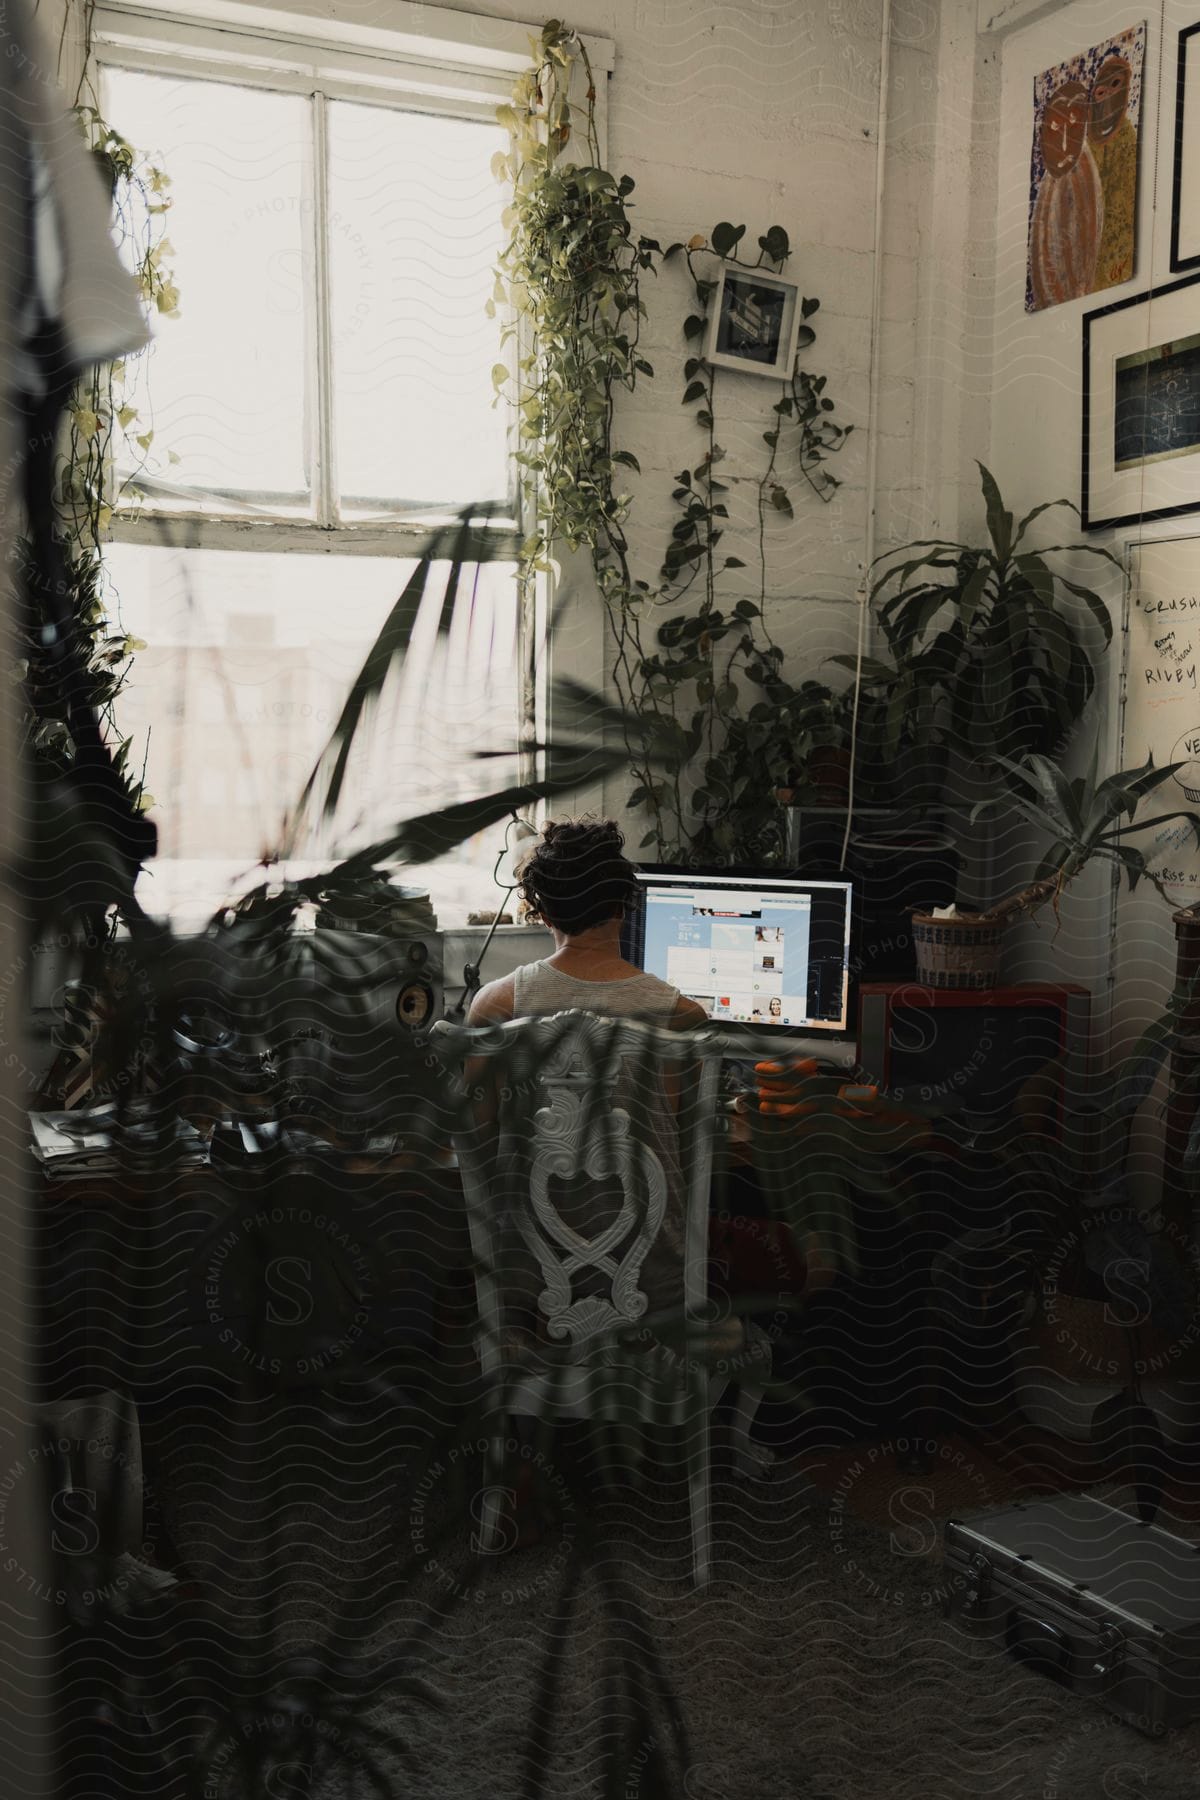 Back view of a person sitting at a table near a window with a computer and potted plants with vines climbing the wall